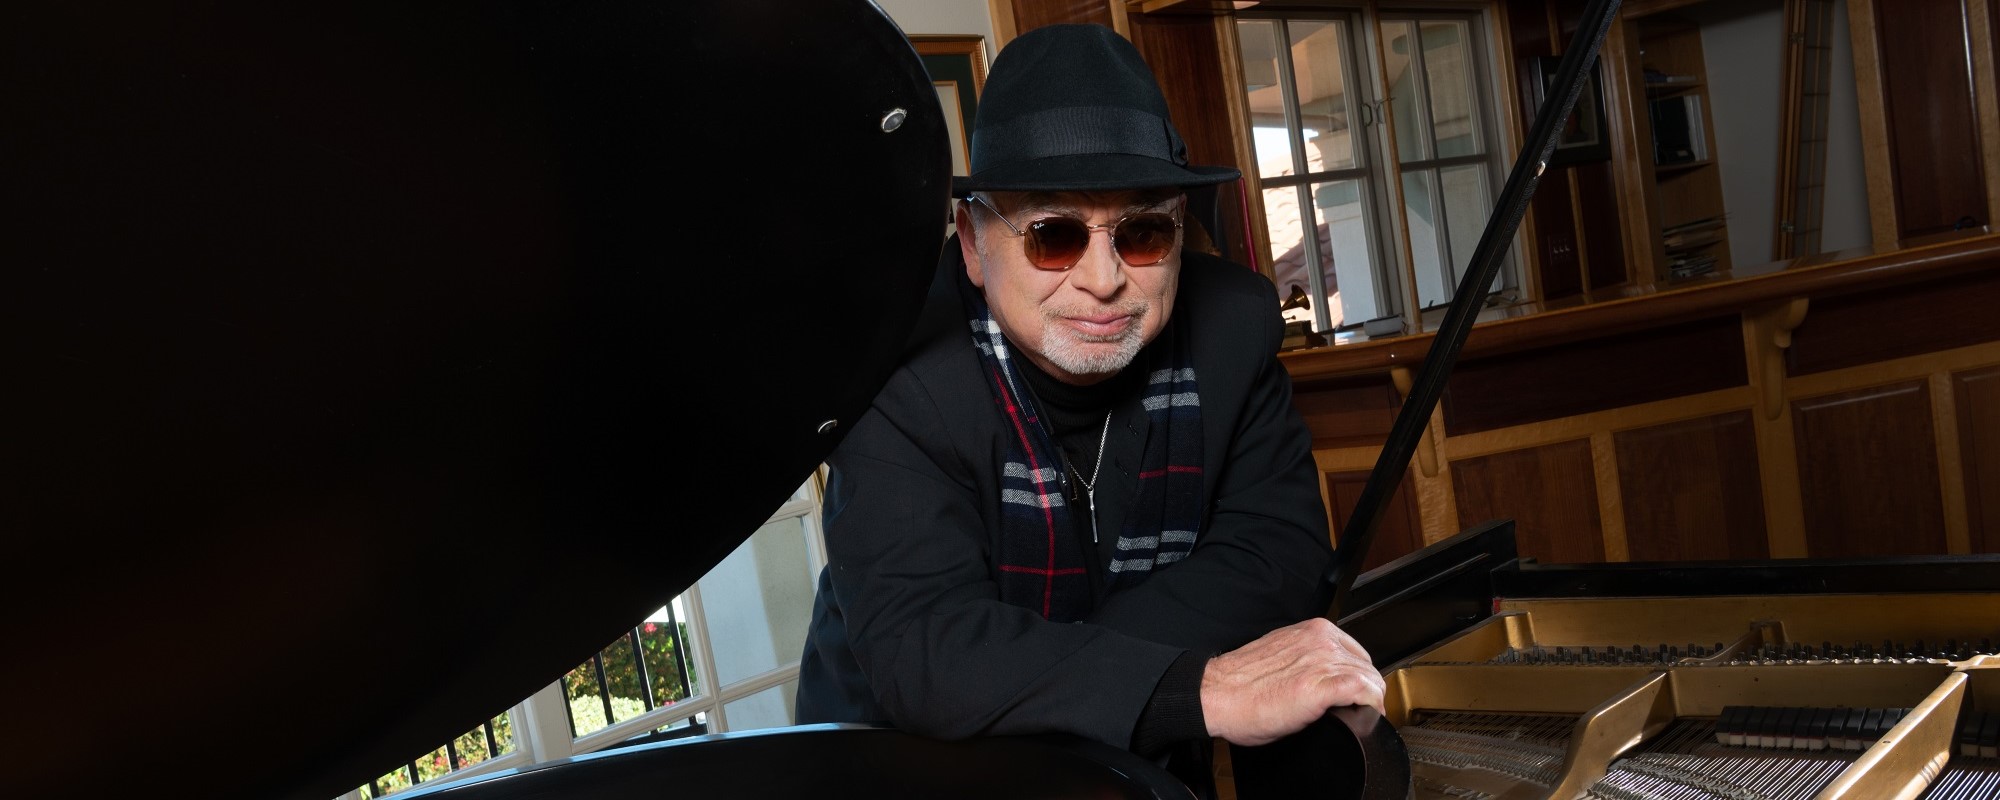 Check Out These 4 Classic Songs by Various Artists Featuring Toto’s David Paich in Honor of His 70th Birthday